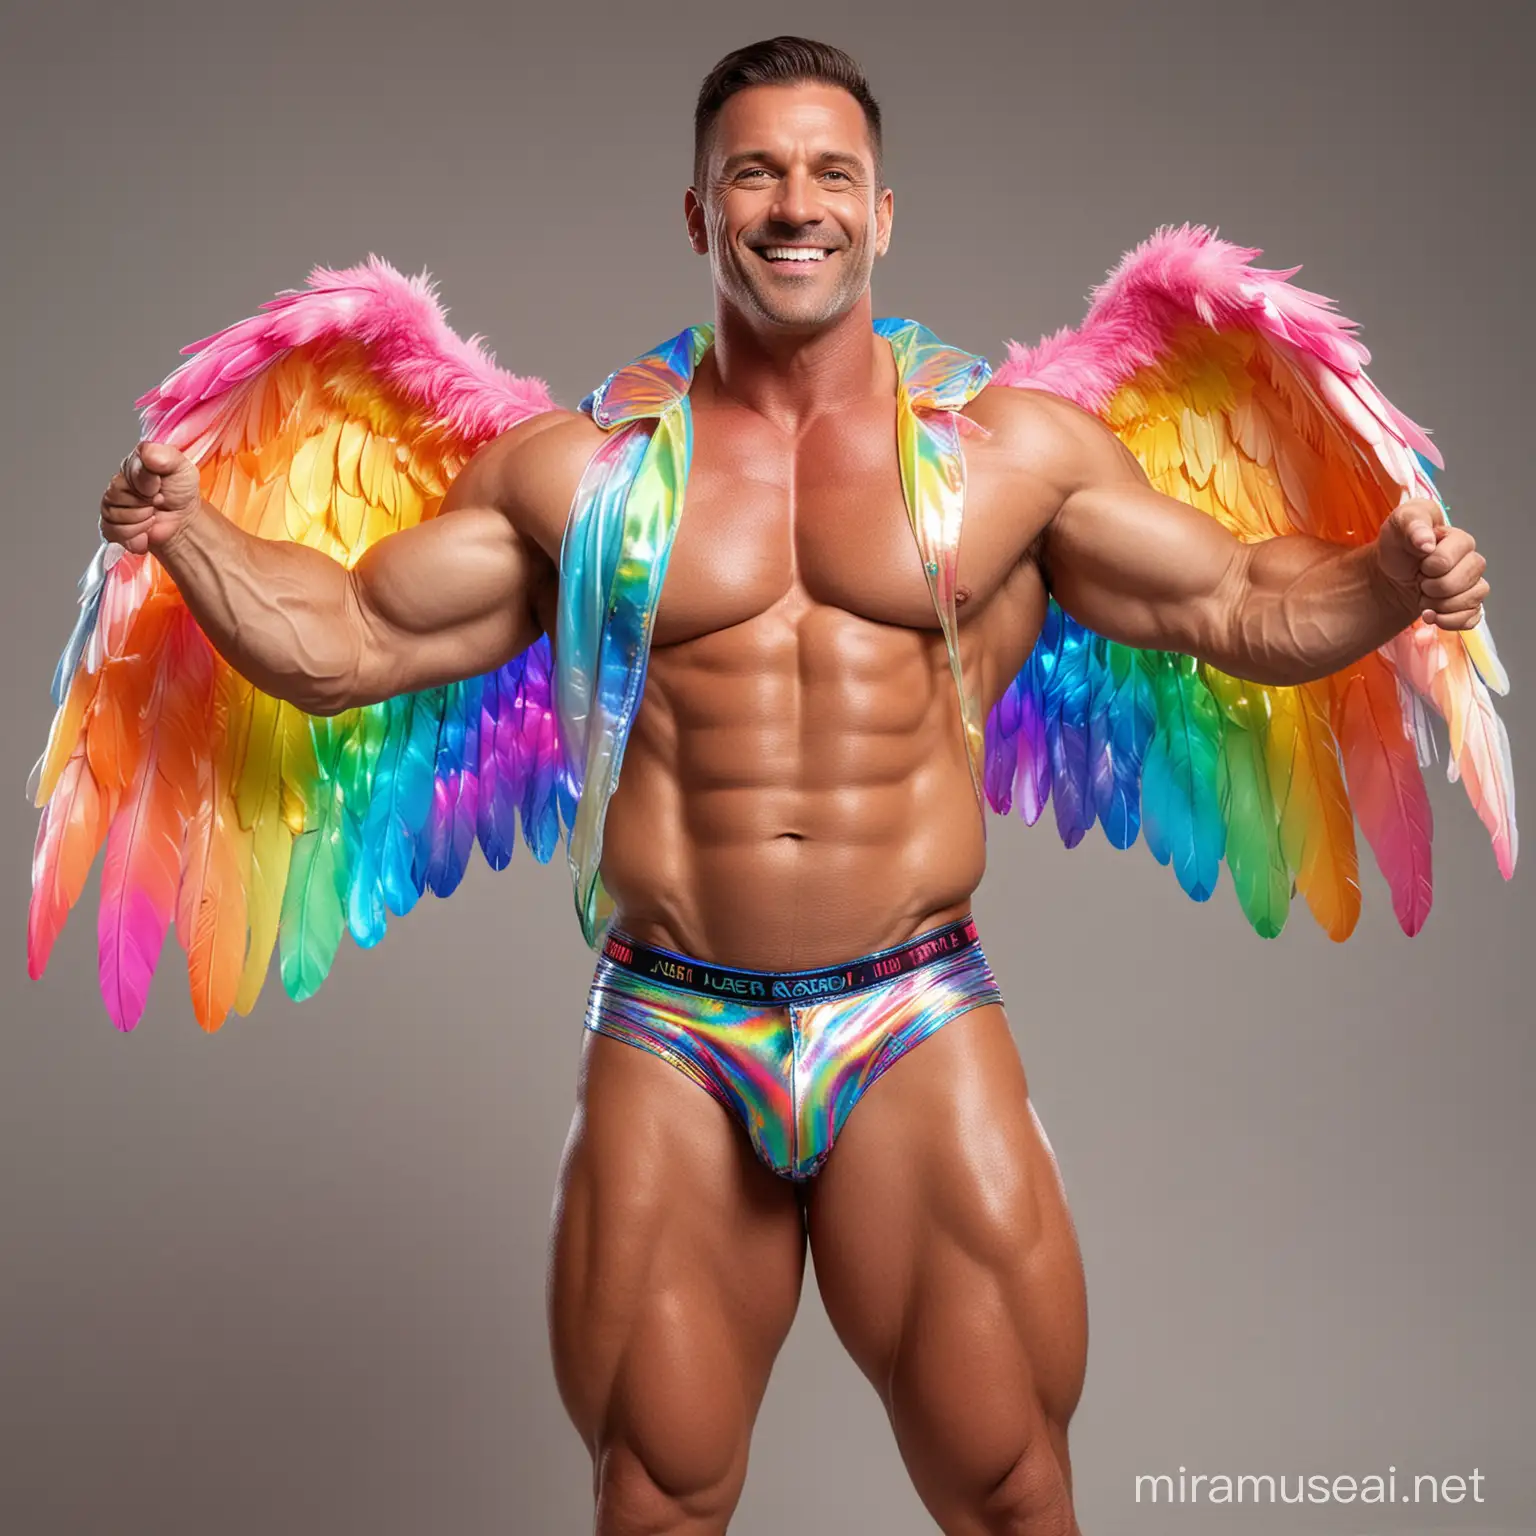 Full Body to feet Topless 40s Ultra Chunky IFBB Bodybuilder Daddy with Great Smile wearing Multi-Highlighter Bright Rainbow with white Coloured See Through Eagle Wings Shoulder LED Jacket Short shorts left arm up Flexing